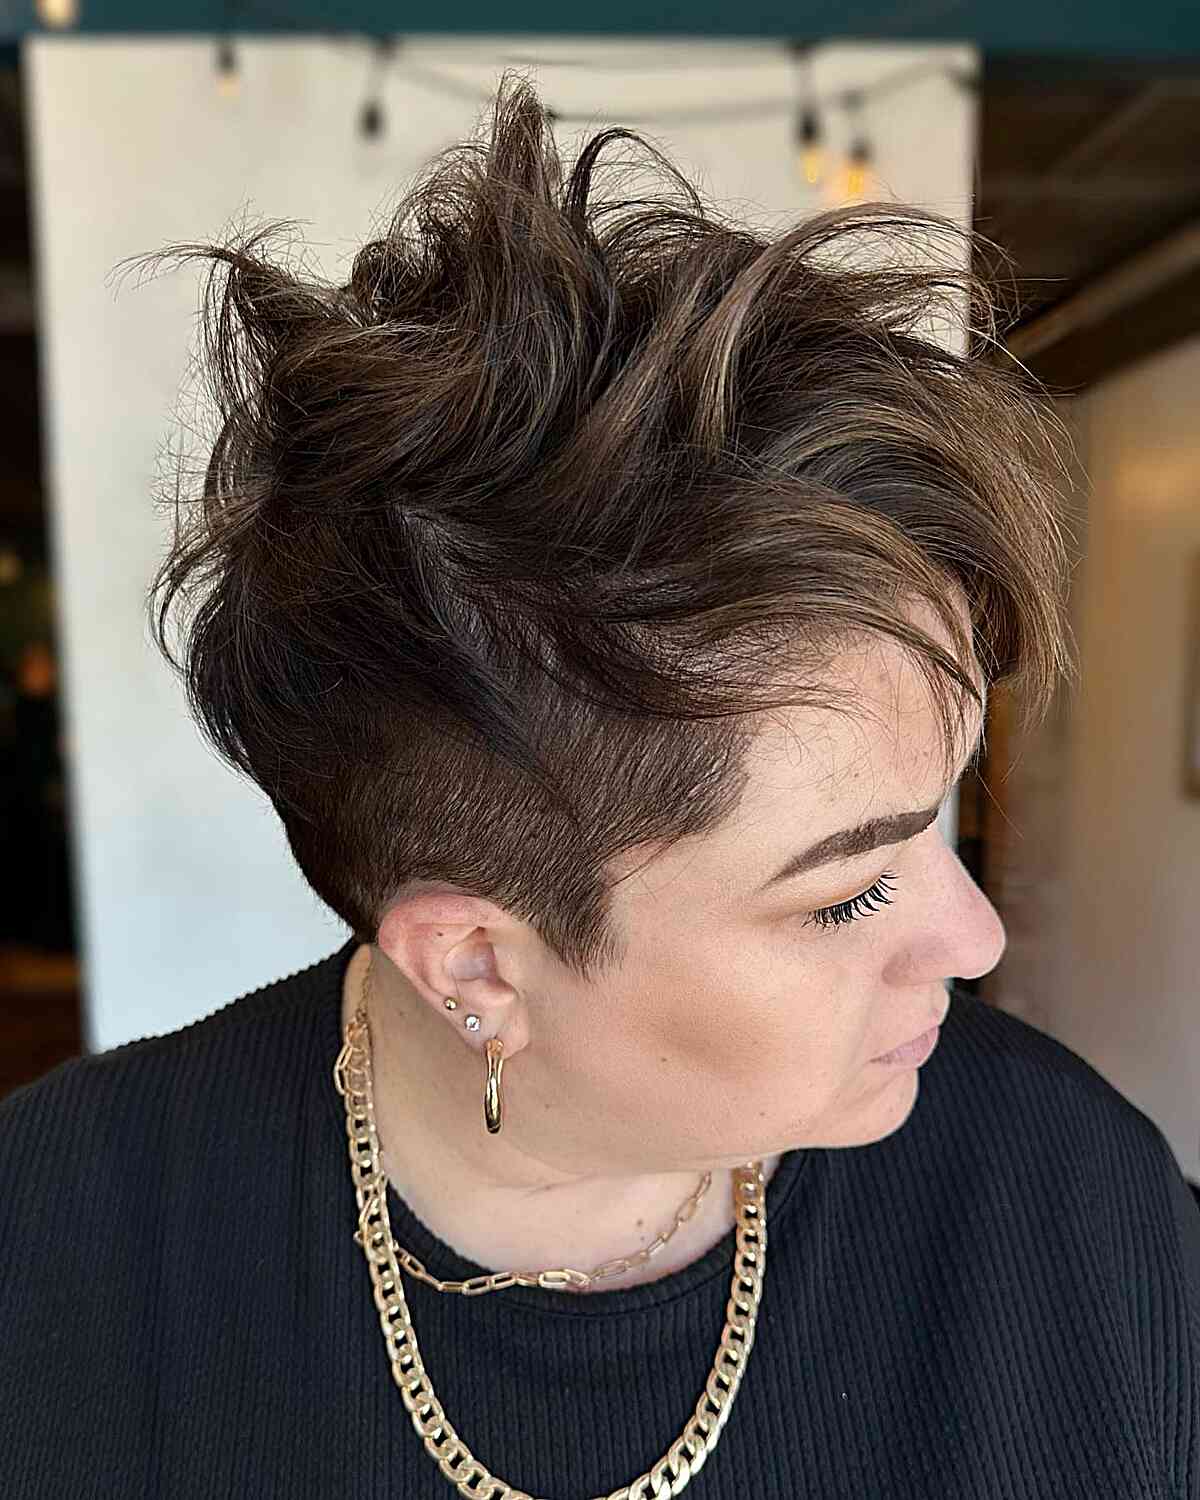 Messy Pixie Cut with Shaved Sides